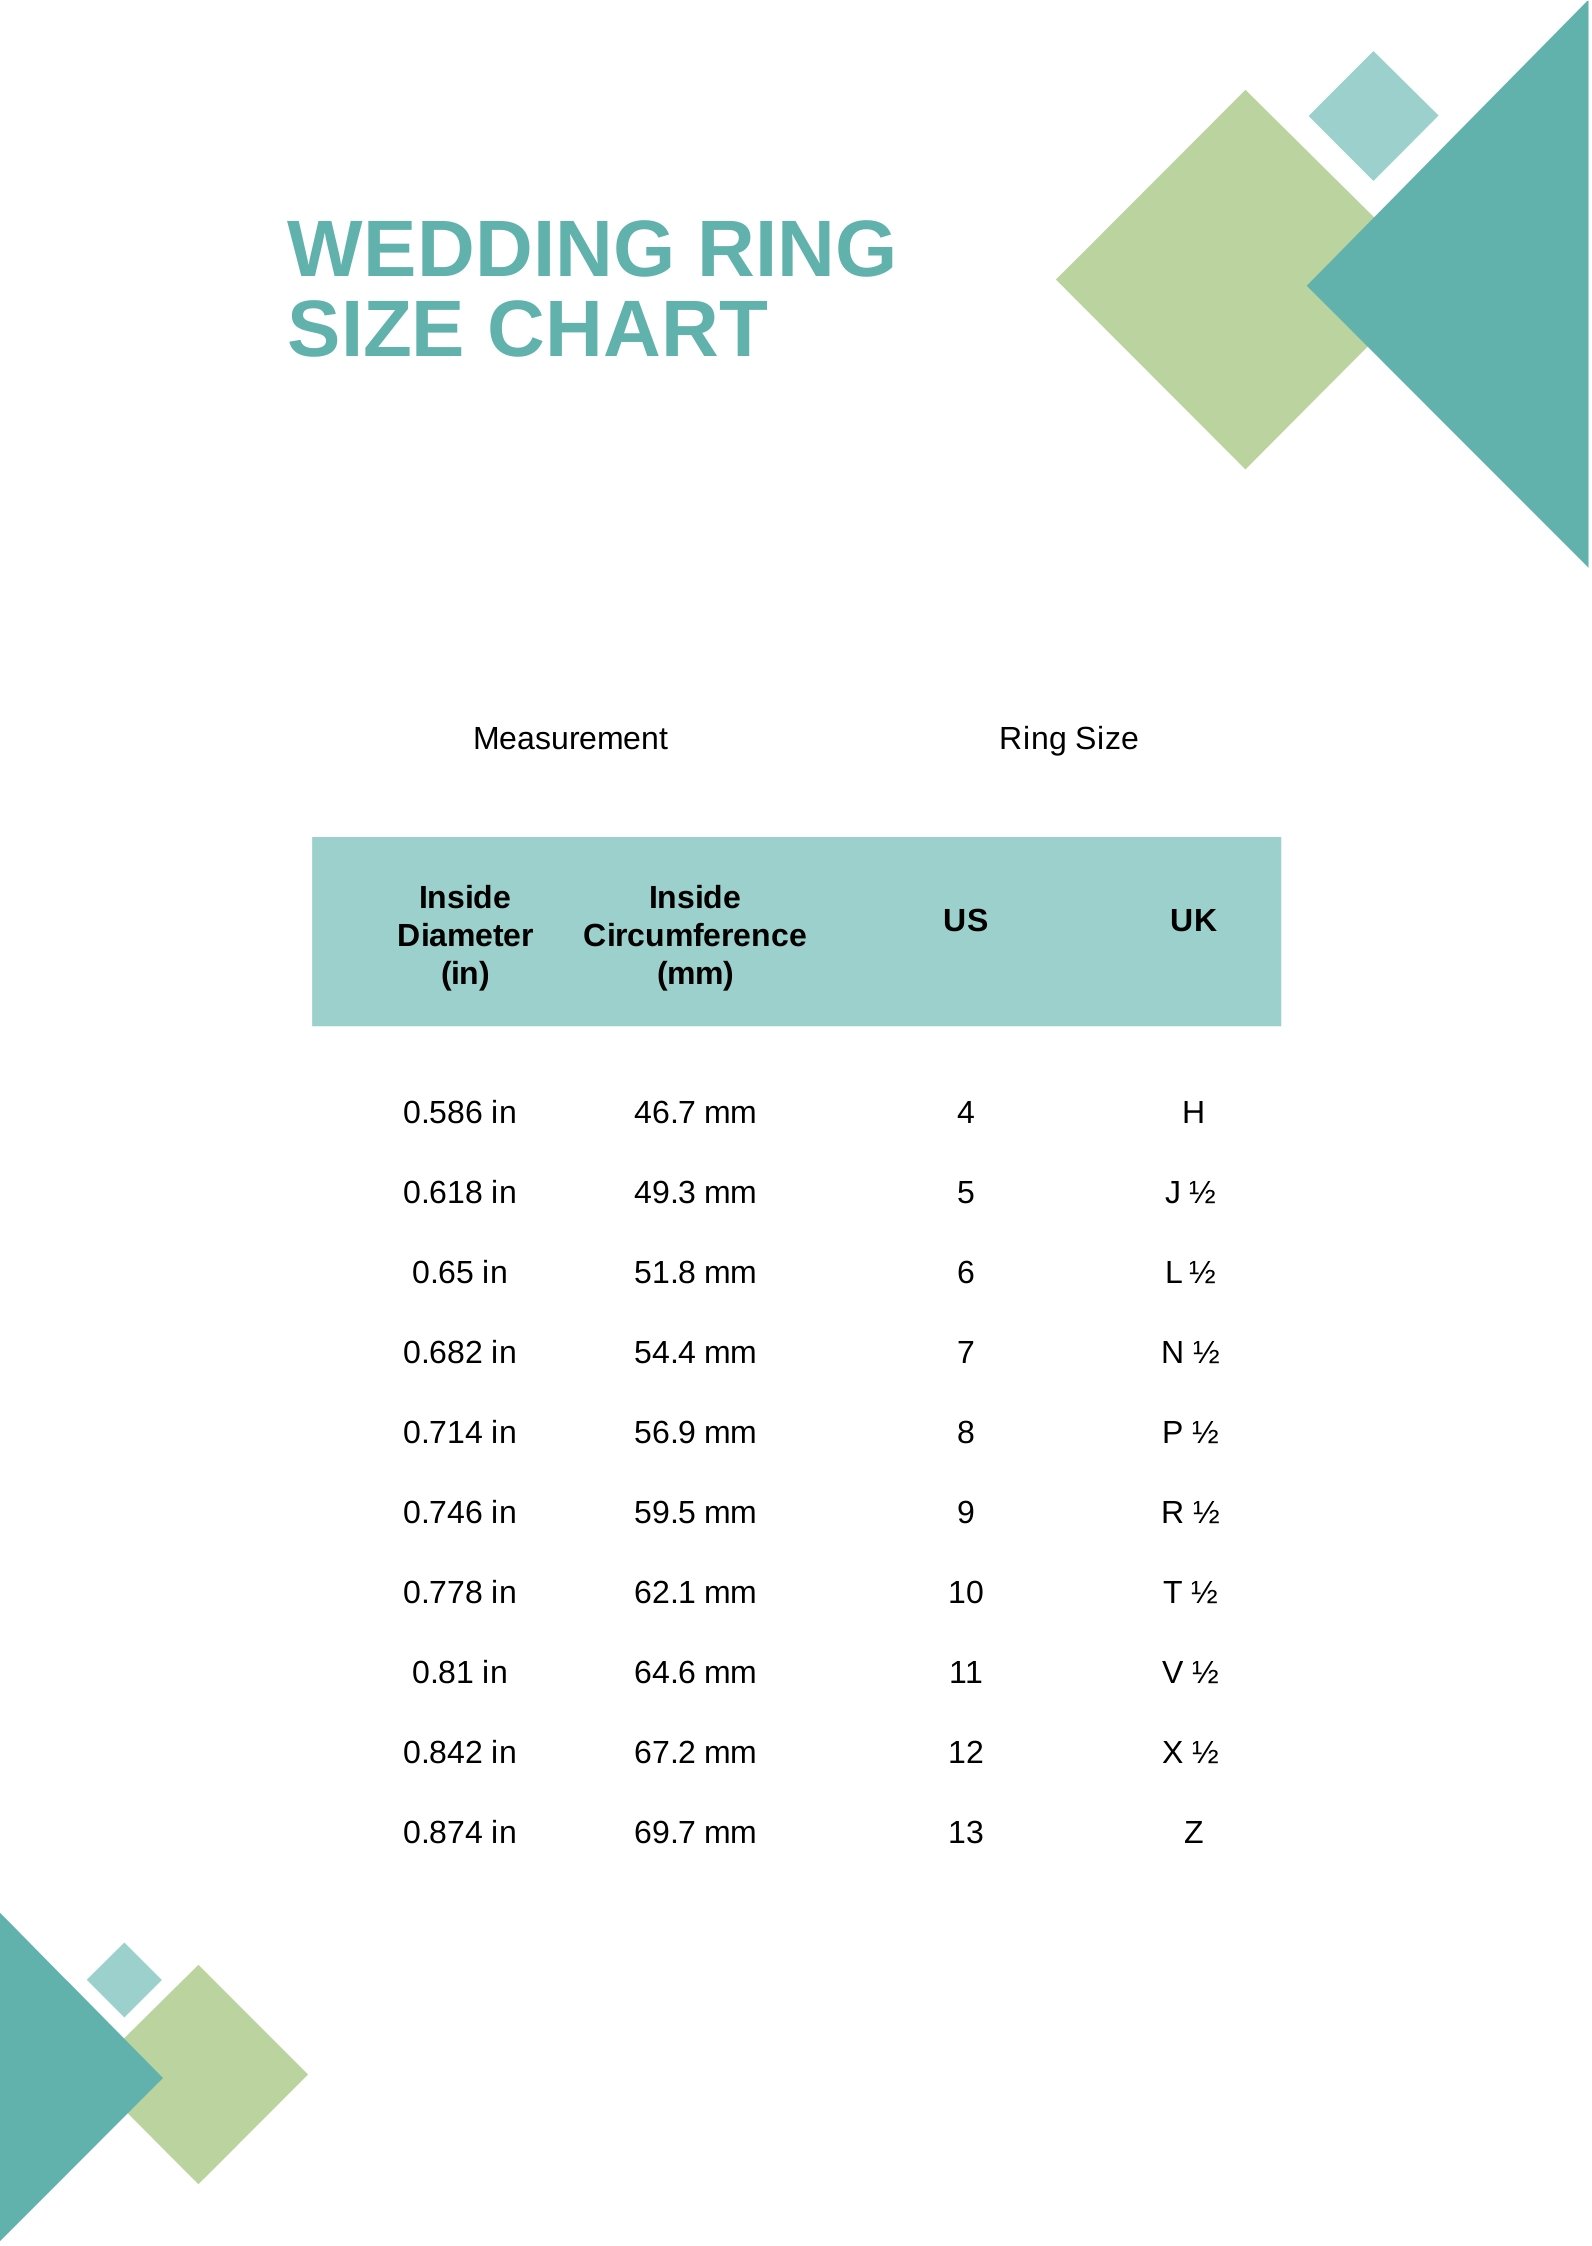 Mens Ring Size Chart in Portable Documents - Download